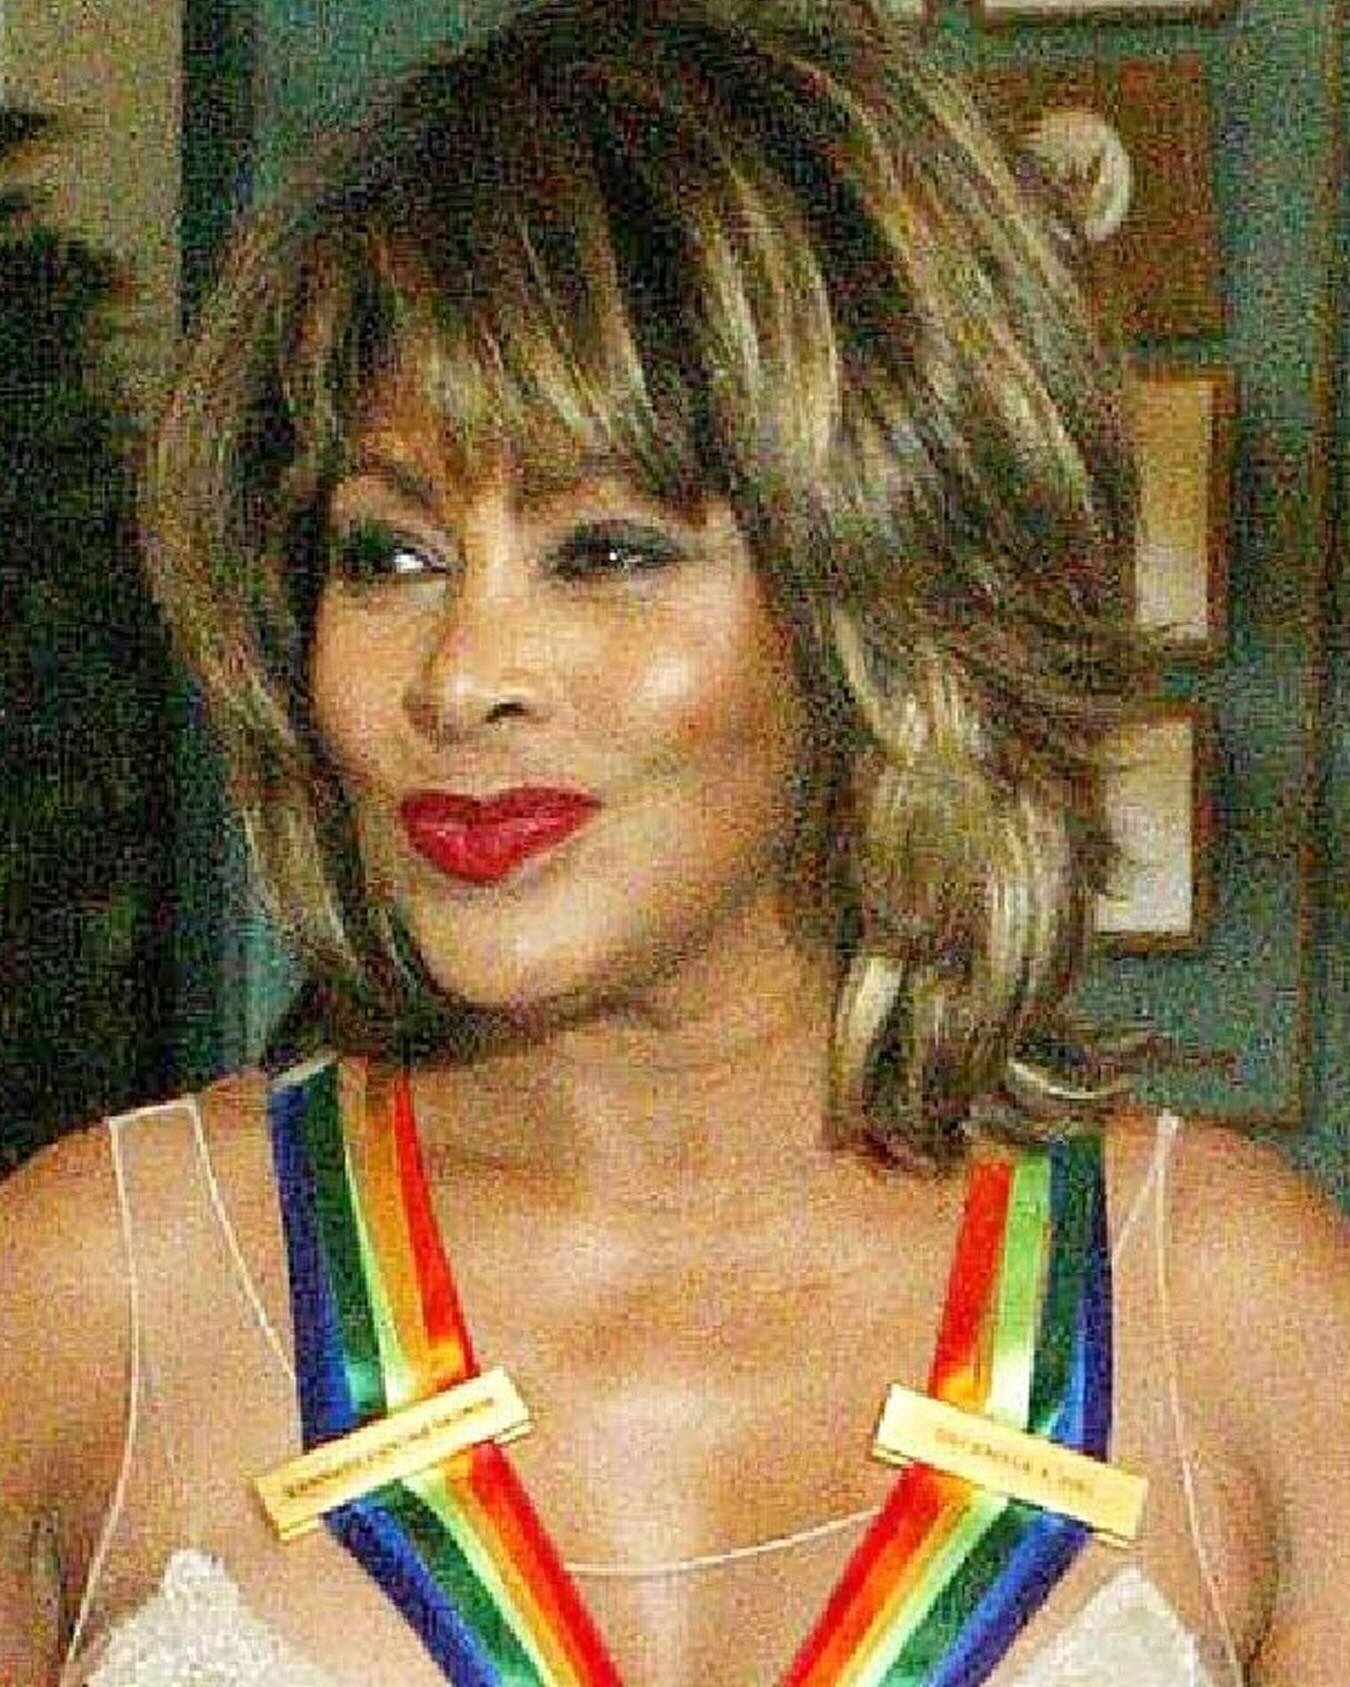 Kicking this week off with BHM at The Flight, we have the LOVELY Mrs. Tina Turner! Tina was born Anna Mae Bullock from Brownsville Tennessee. Tina was known as the &ldquo;Queen of Rock &lsquo;n&rsquo; Roll. Most know her from being in a marriage with